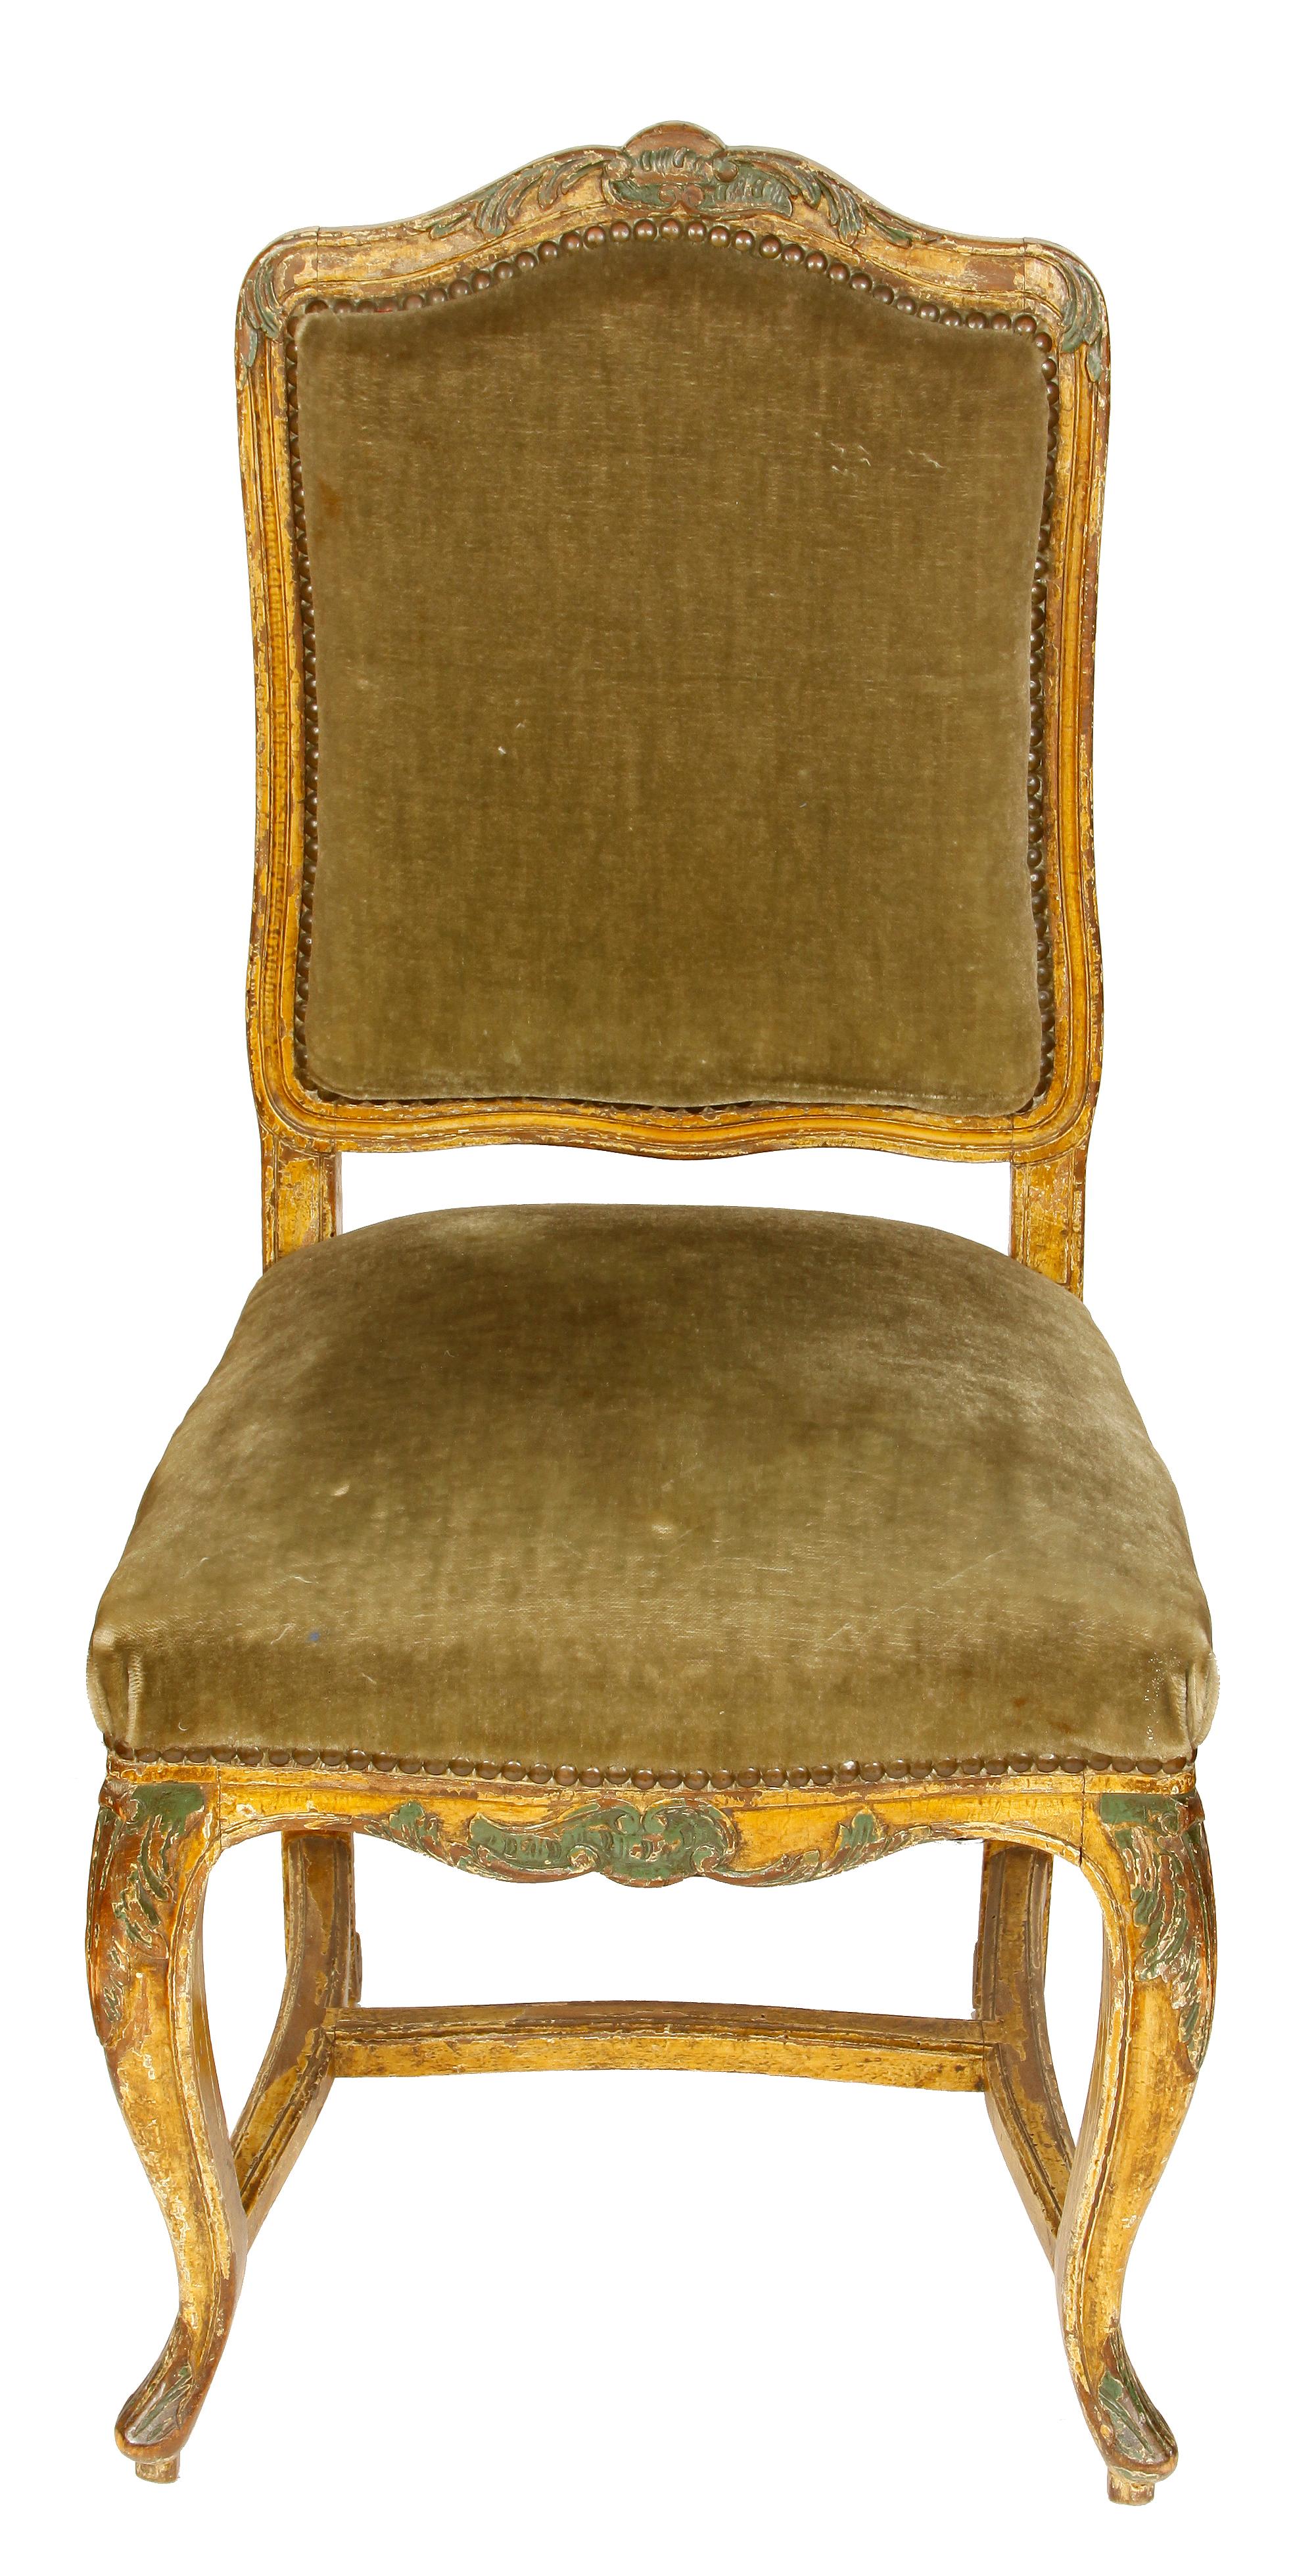 European side chair upholstered in green velvet with carved back, curved legs and stretchers in Louis XIV style.